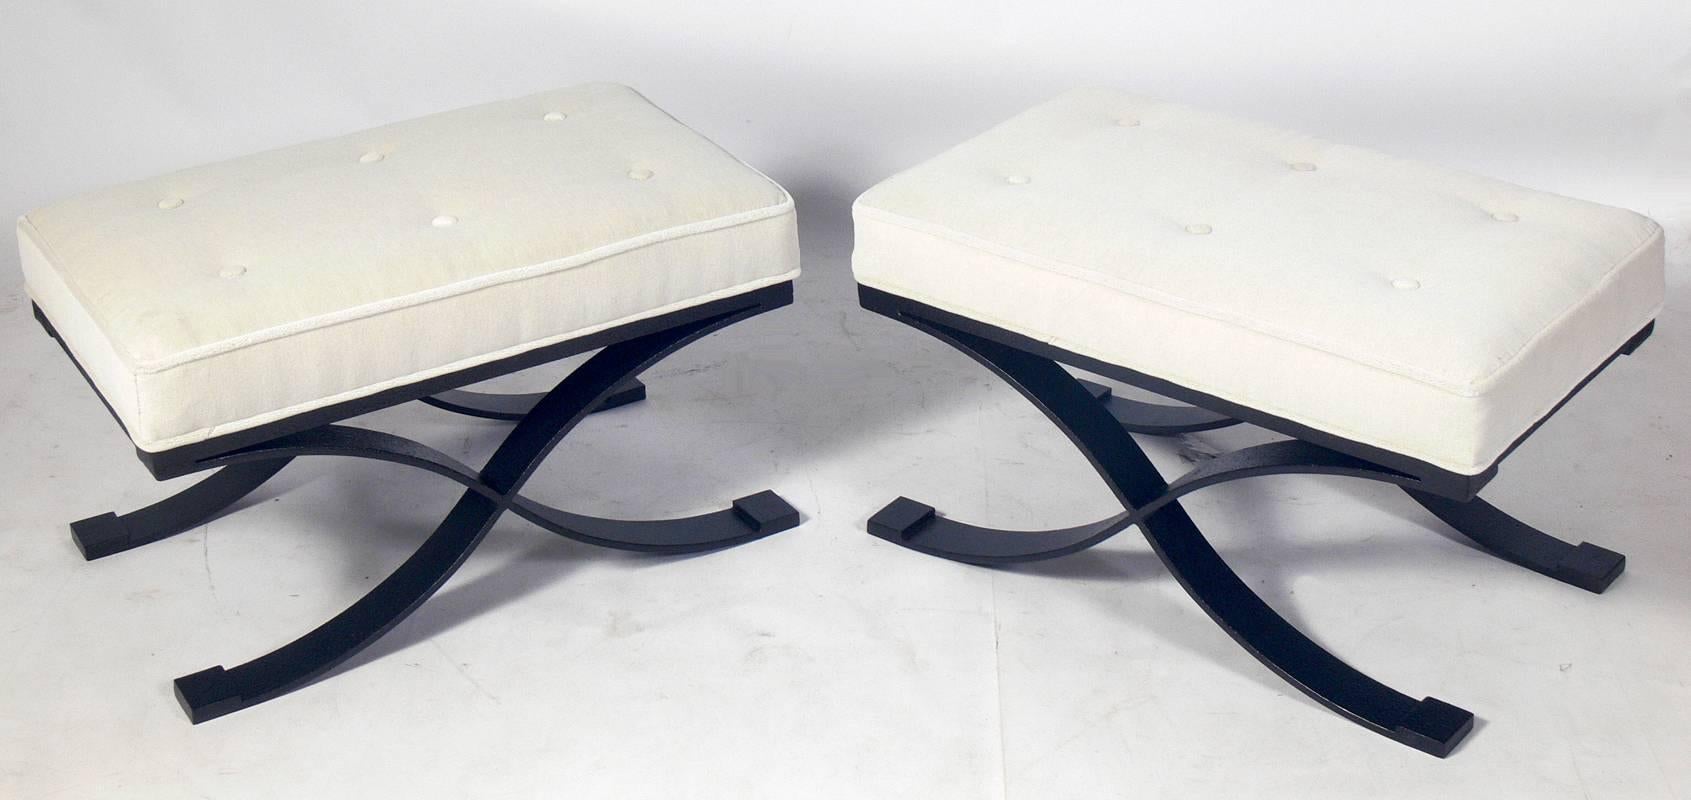 Pair of Elegant X Base Benches in Bronze Finished Metal and Ivory Velvet, American, circa 1960s. They are executed in metal with a dimpled bronze finish and newly upholstered in ivory color velvet. Very heavy and well made.